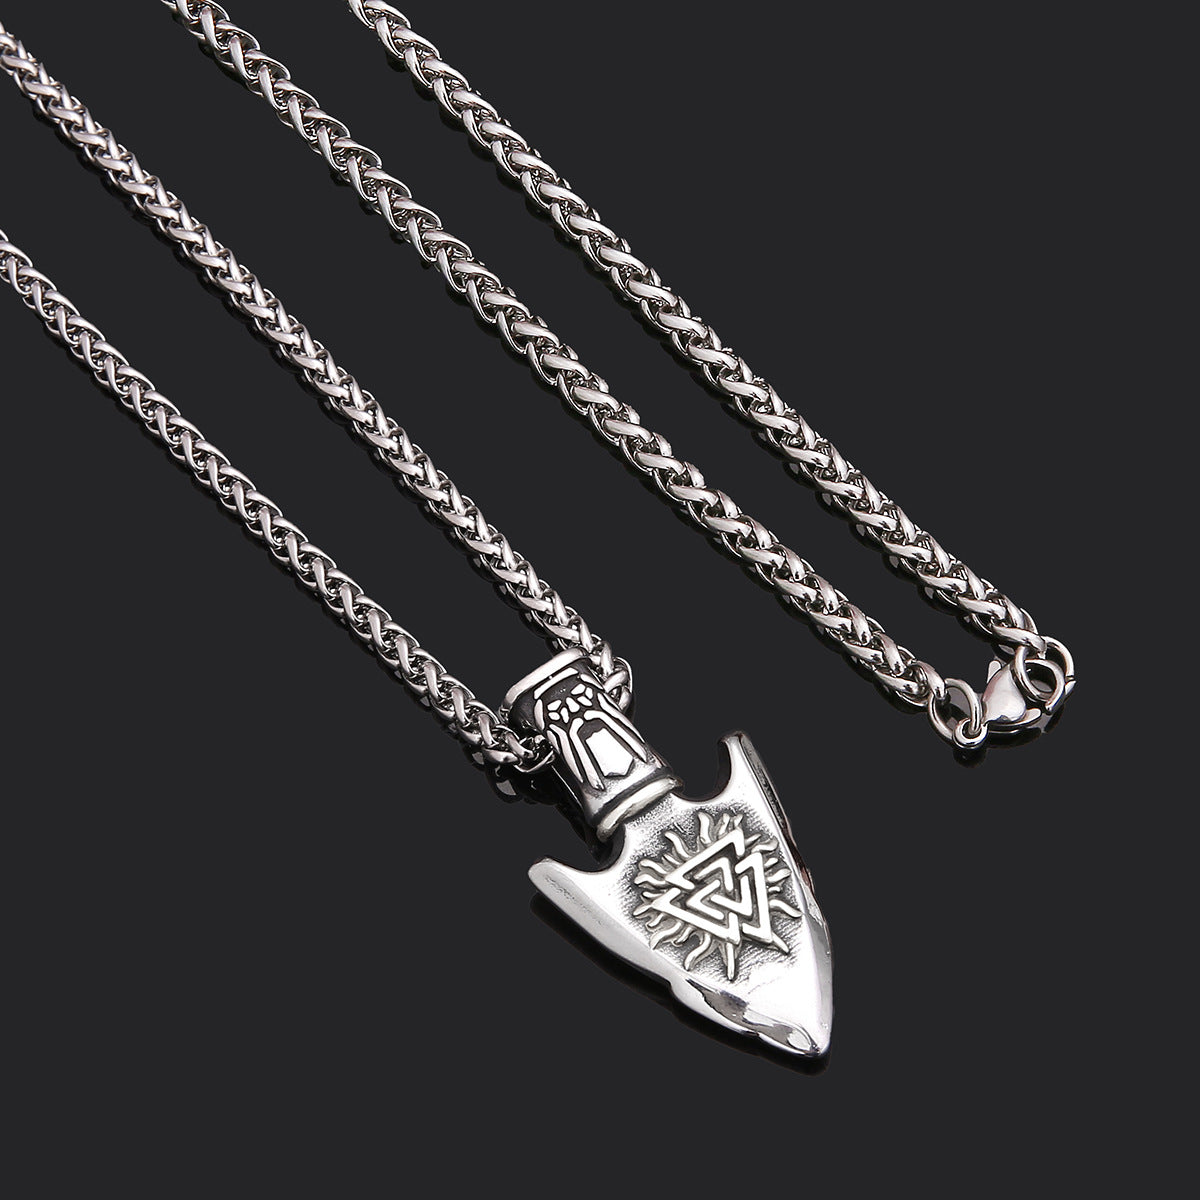 Hip Hop Necklace Stainless Steel Shield Pendant For Men Steel Necklace